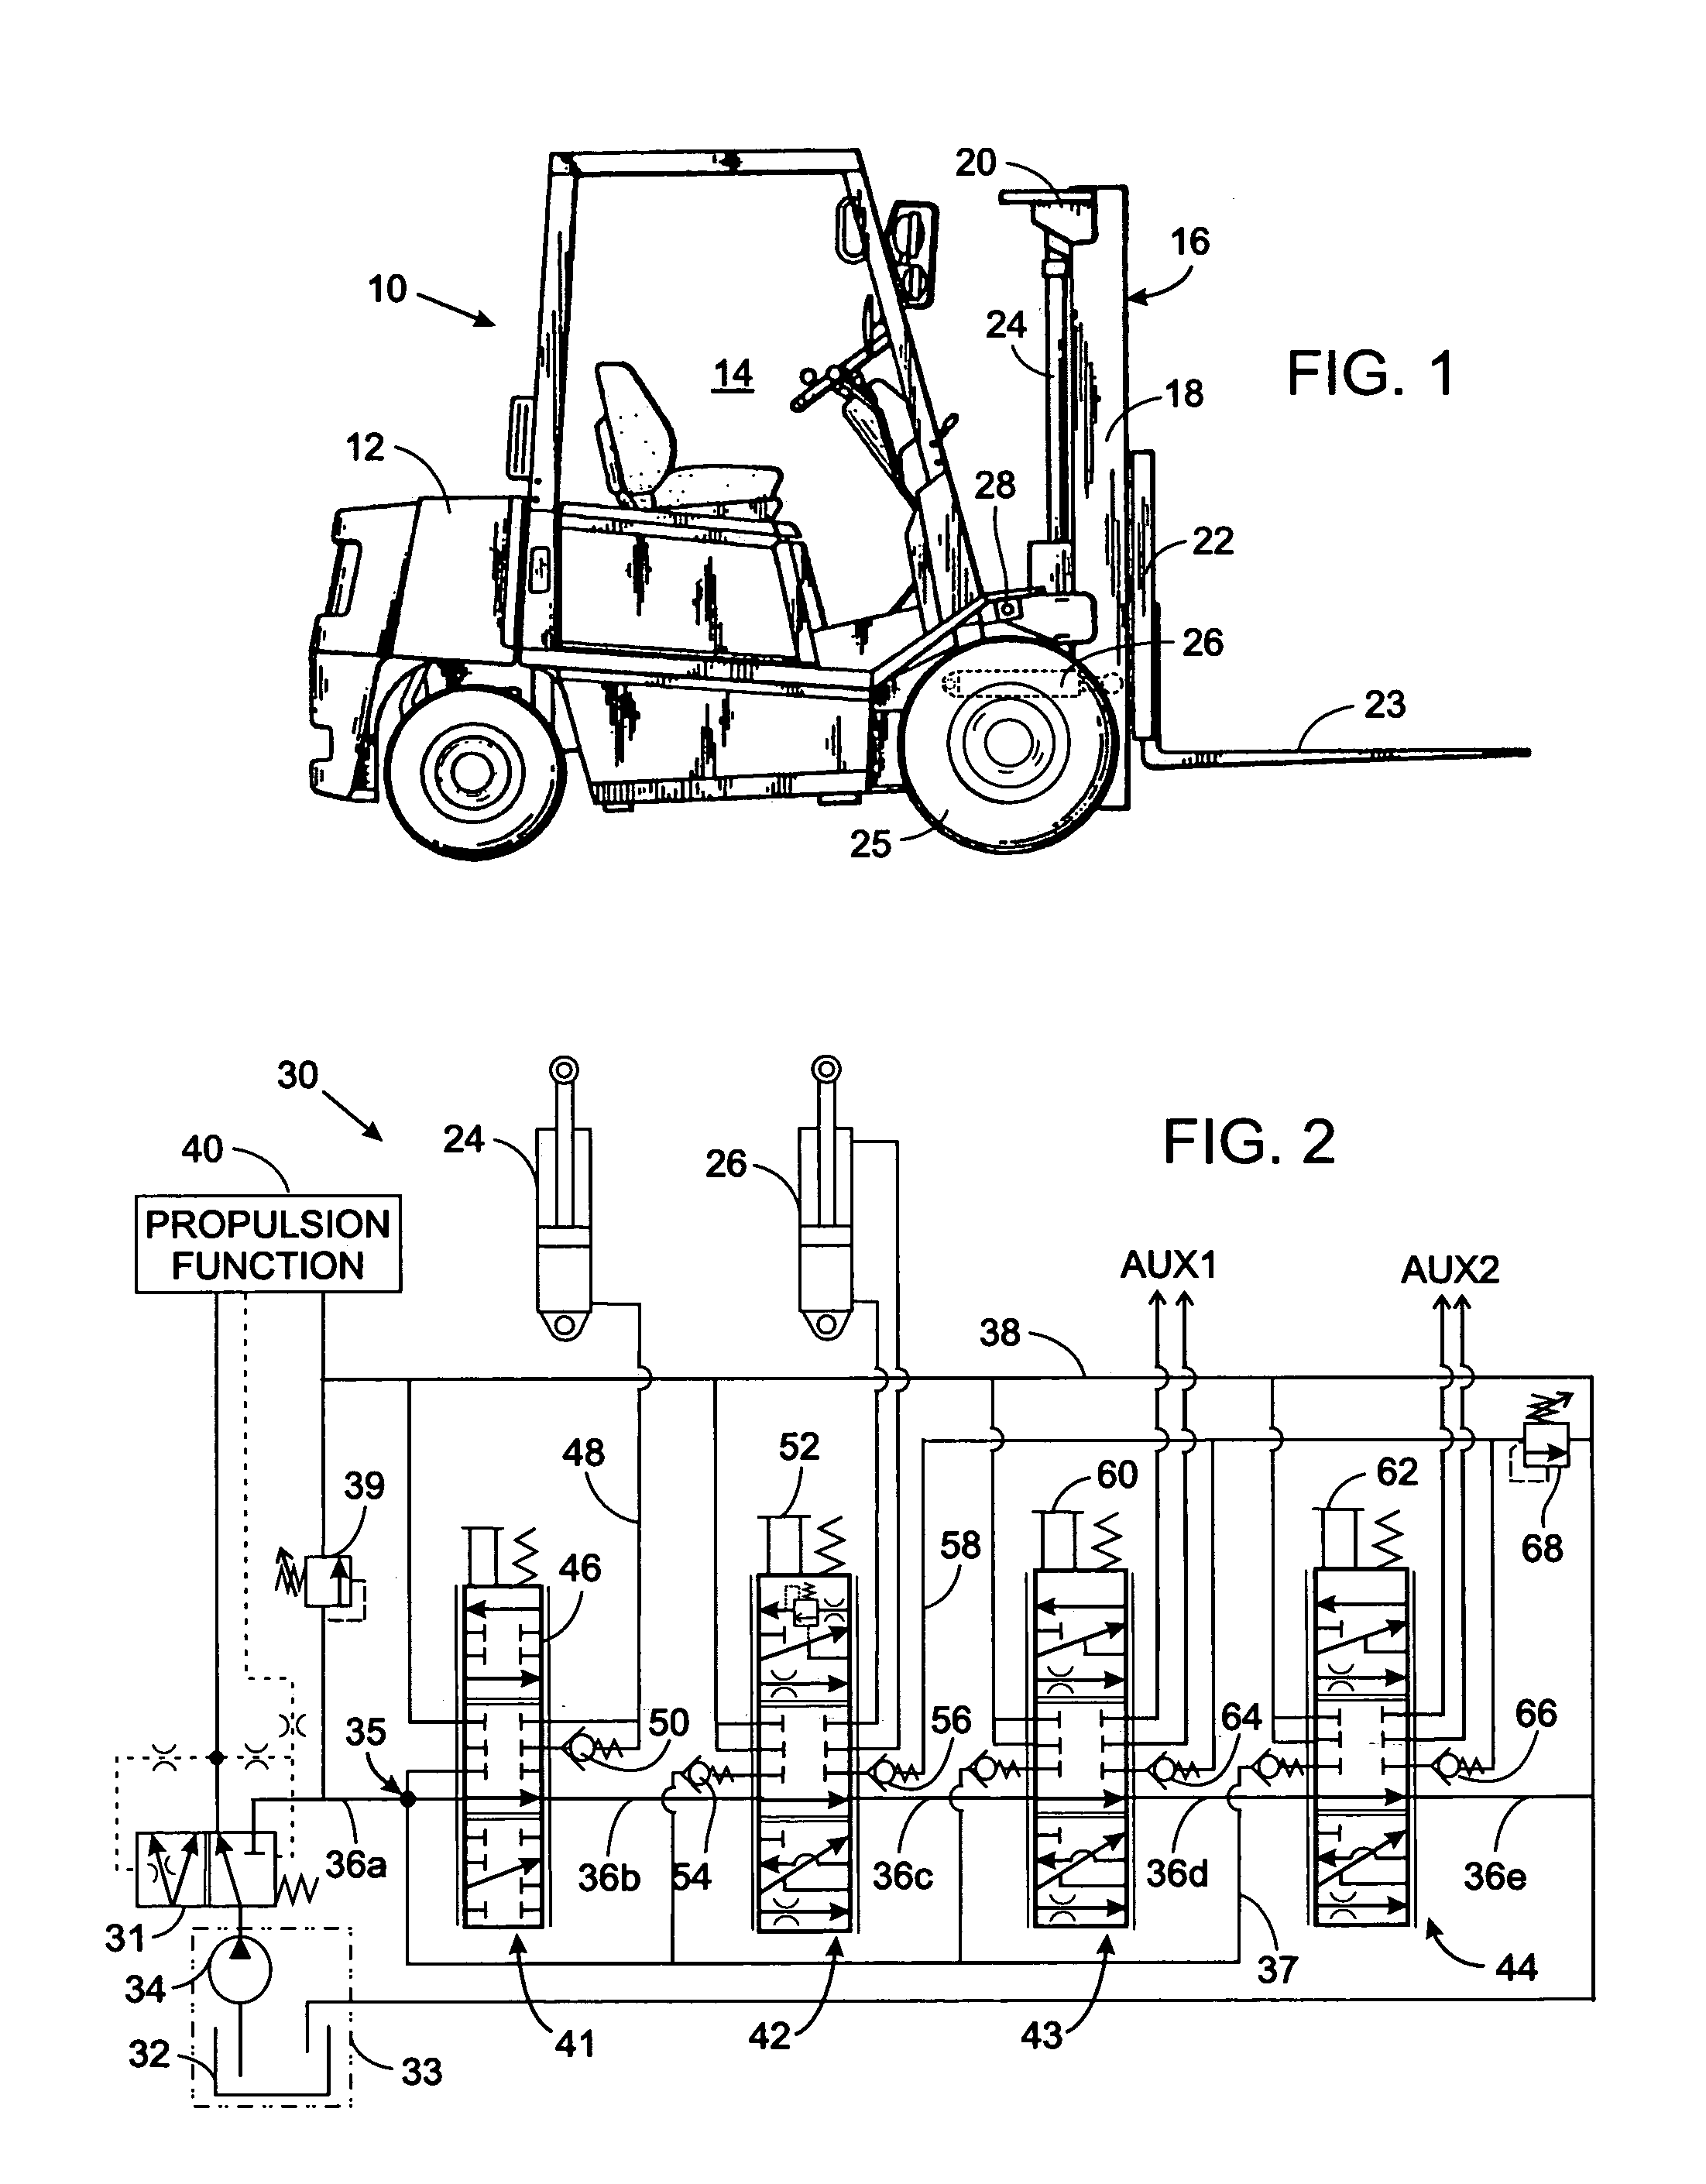 Hydraulic system with multiple pressure relief levels